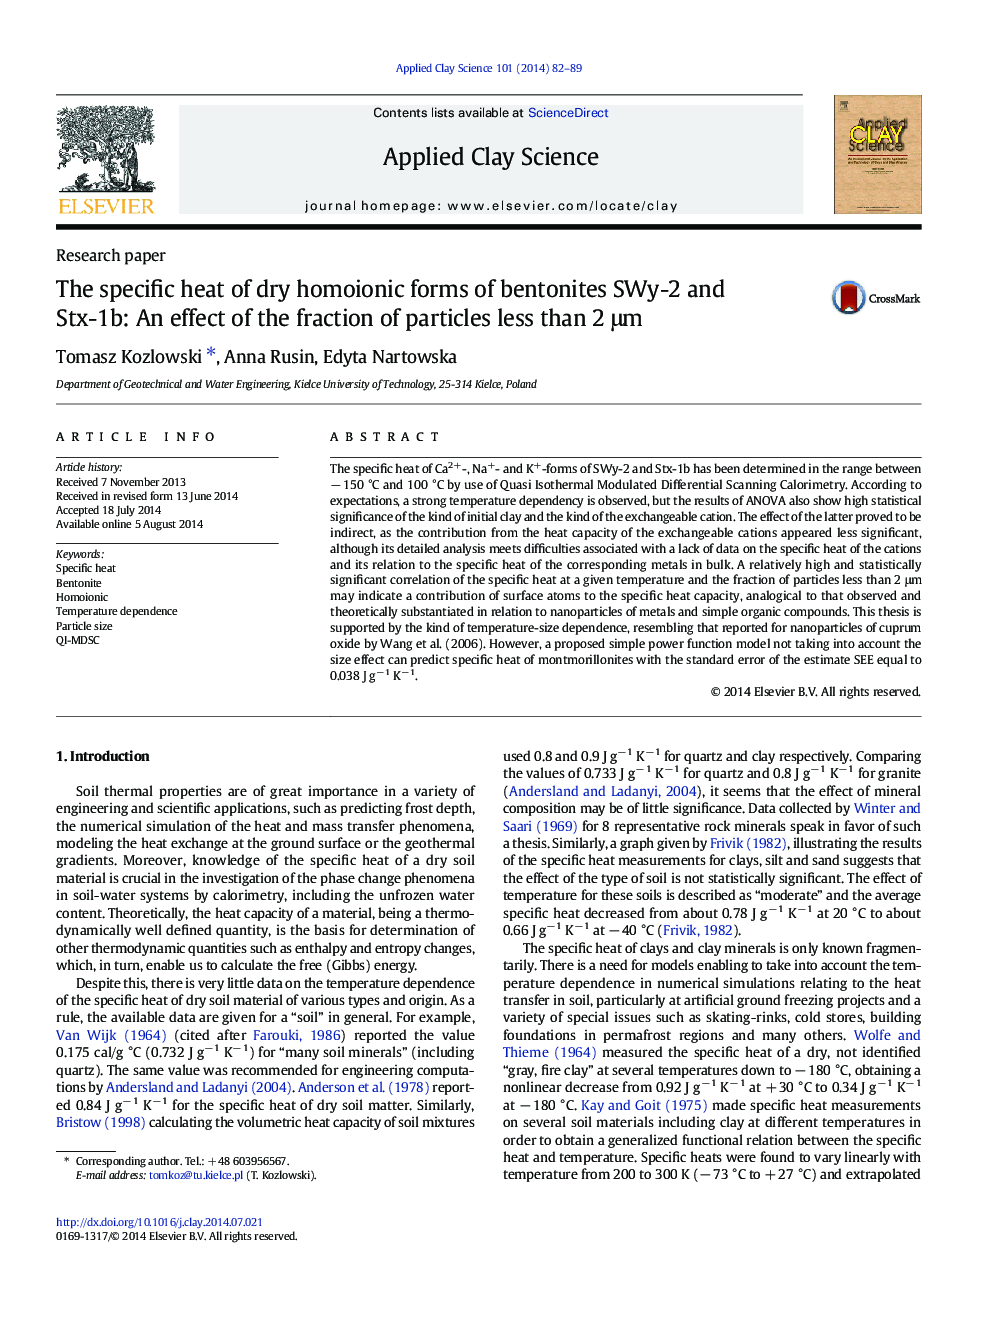 The specific heat of dry homoionic forms of bentonites SWy-2 and Stx-1b: An effect of the fraction of particles less than 2Â Î¼m